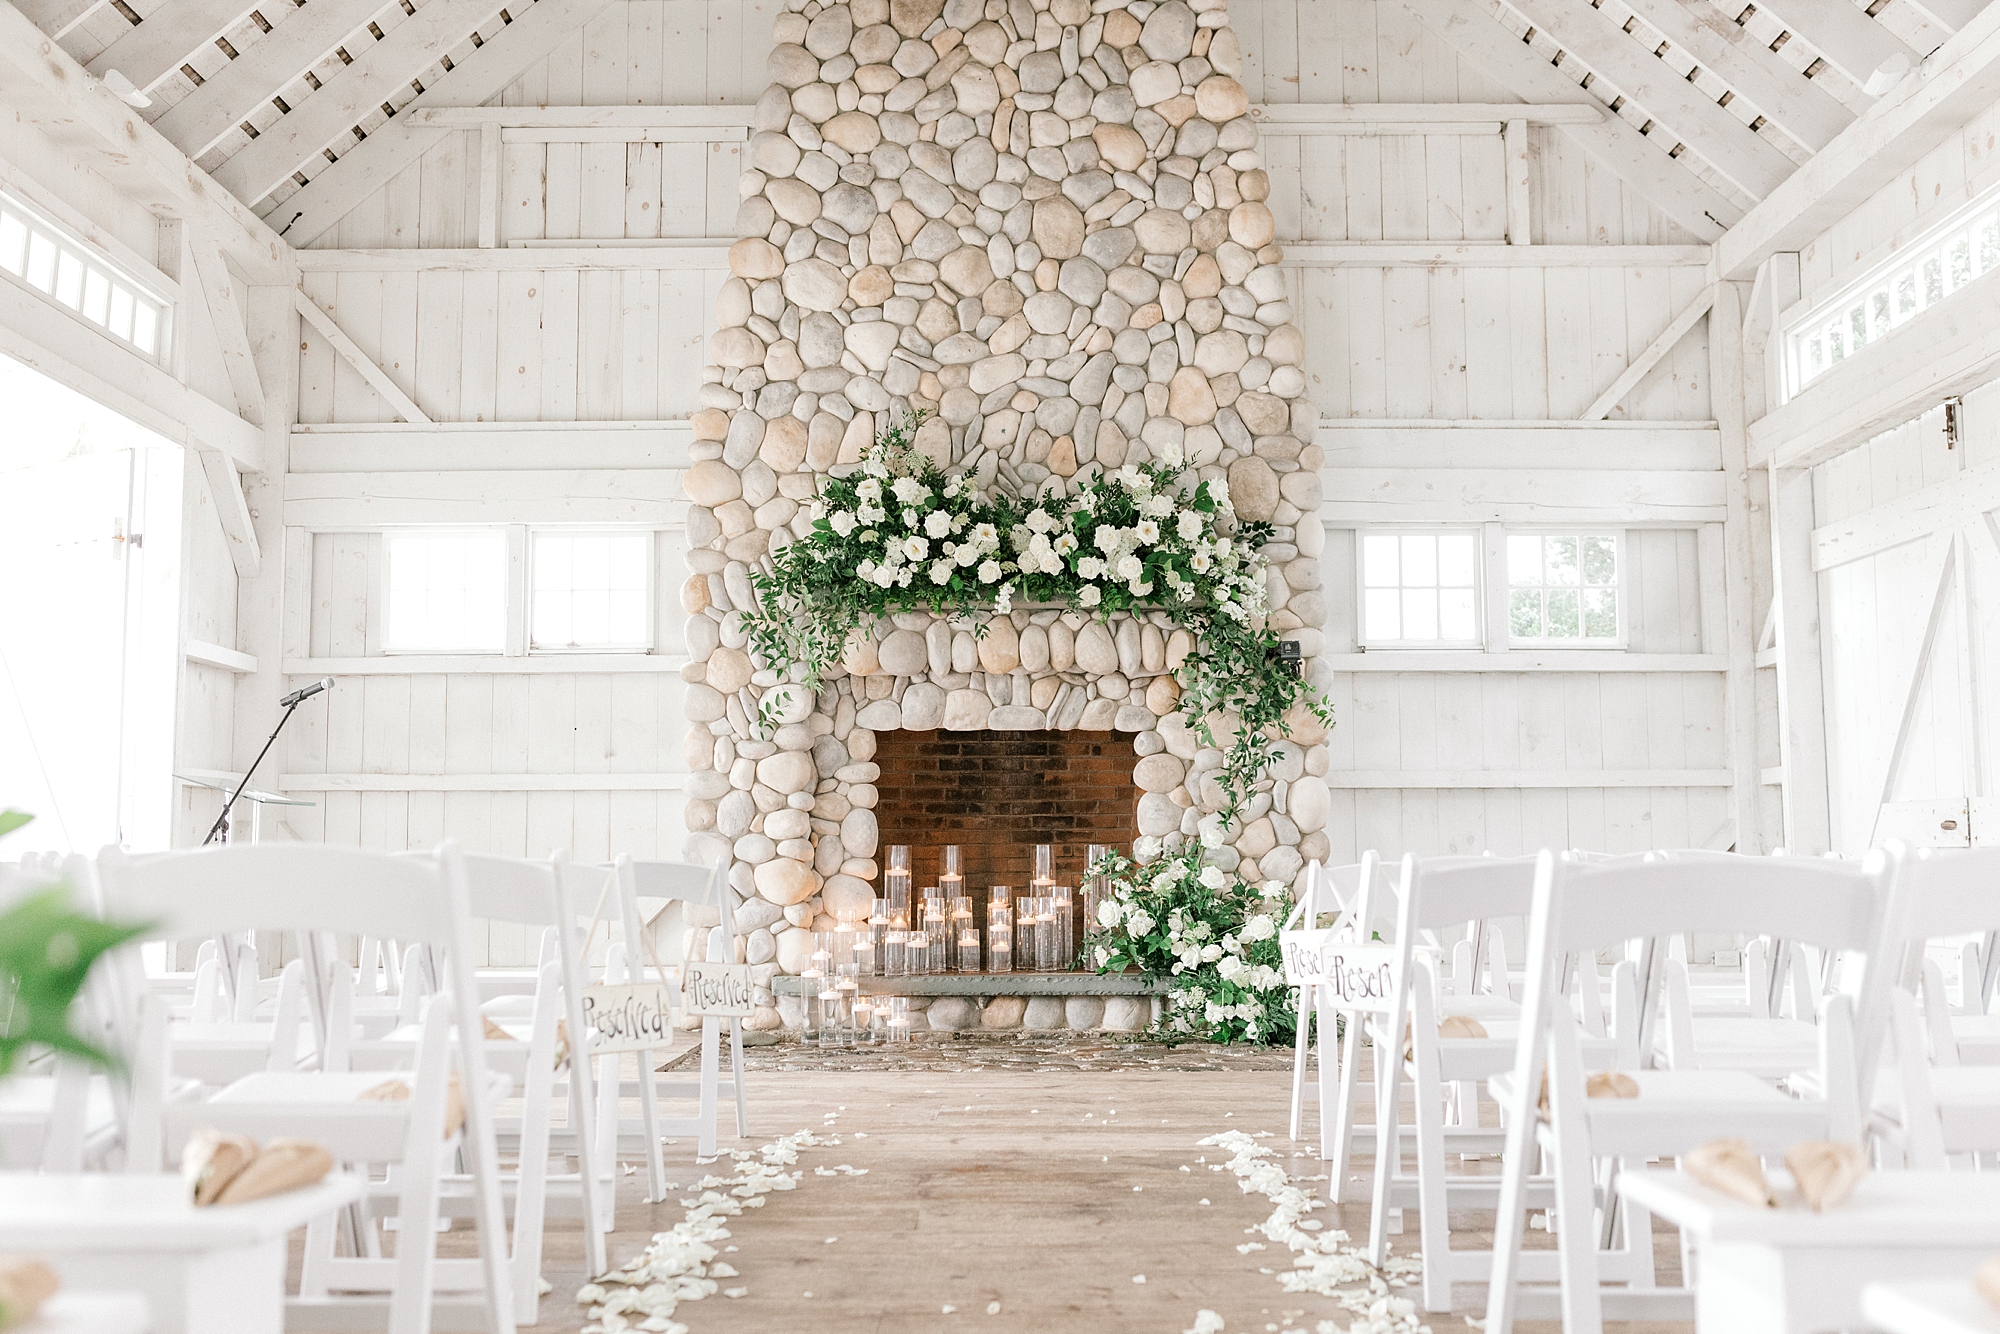 ceremony site in front of stone fireplace at Bonnet Island Estate with white flowers and greenery on mantel